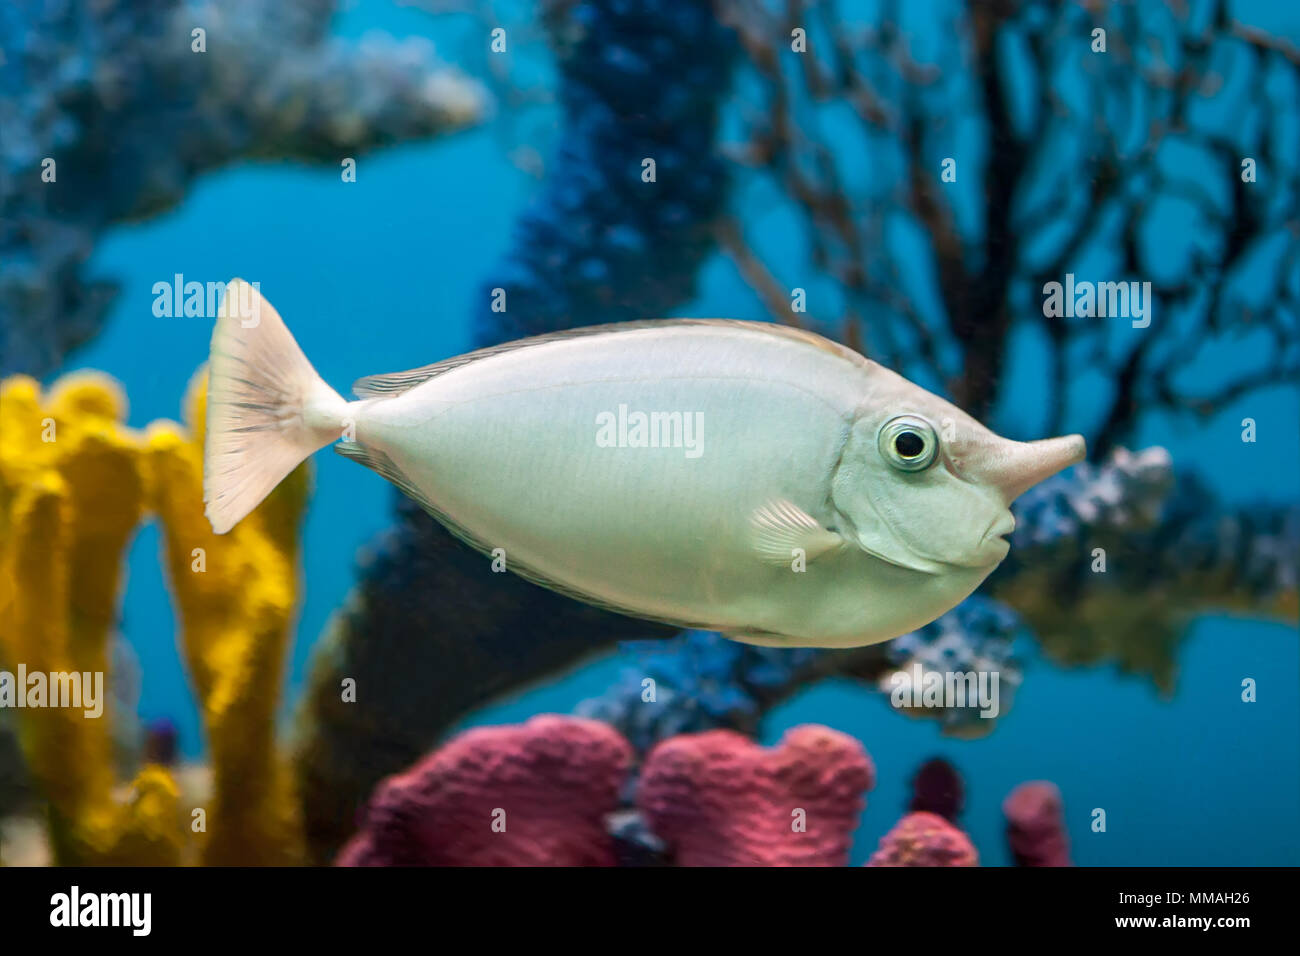 Unicorn fish in front of brightly coloured corals in an aquarium Stock Photo